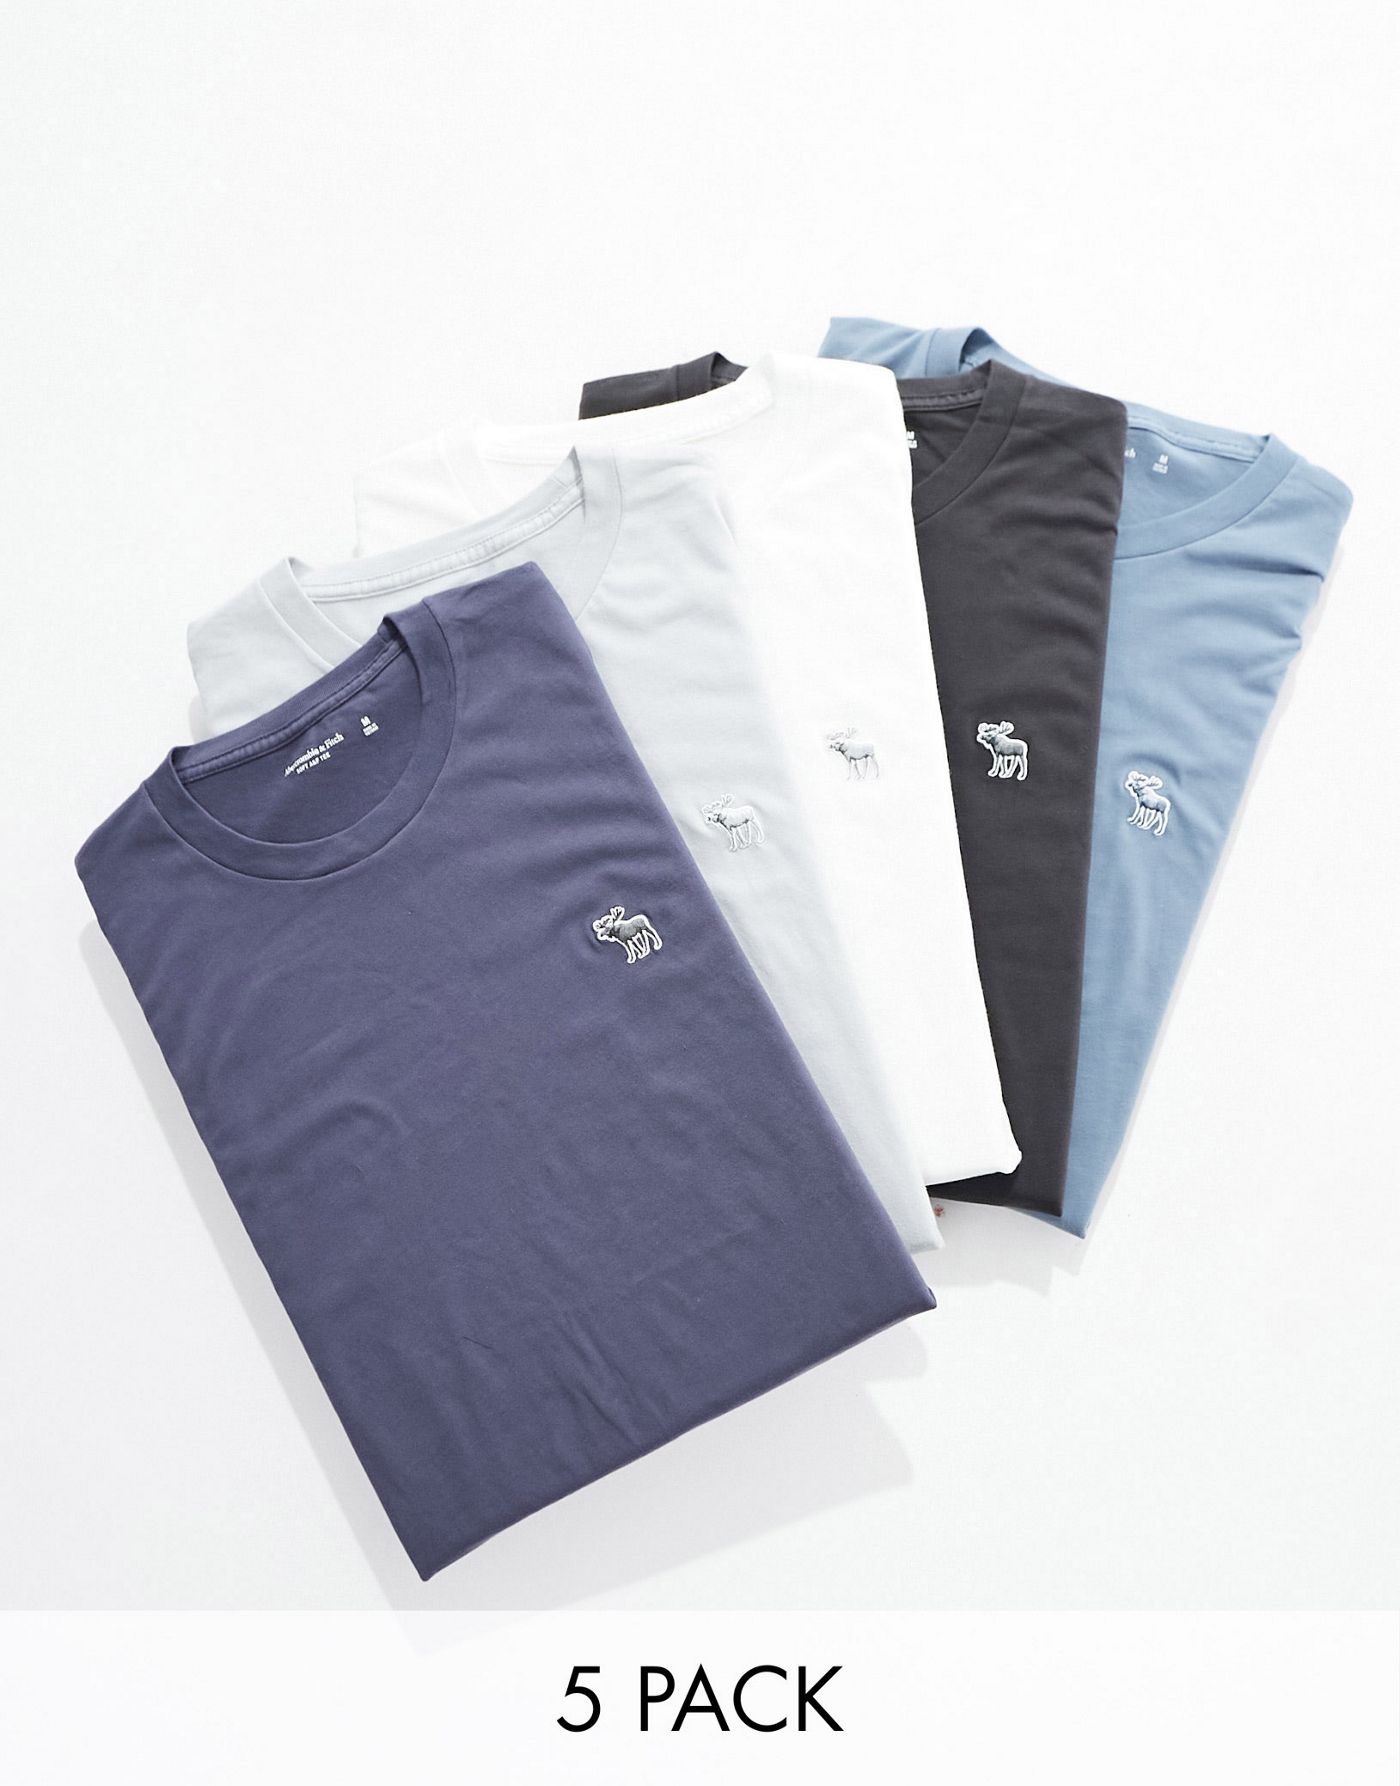 Abercrombie & Fitch 5 pack 3D icon logo t-shirt in tonal blues, grey, white